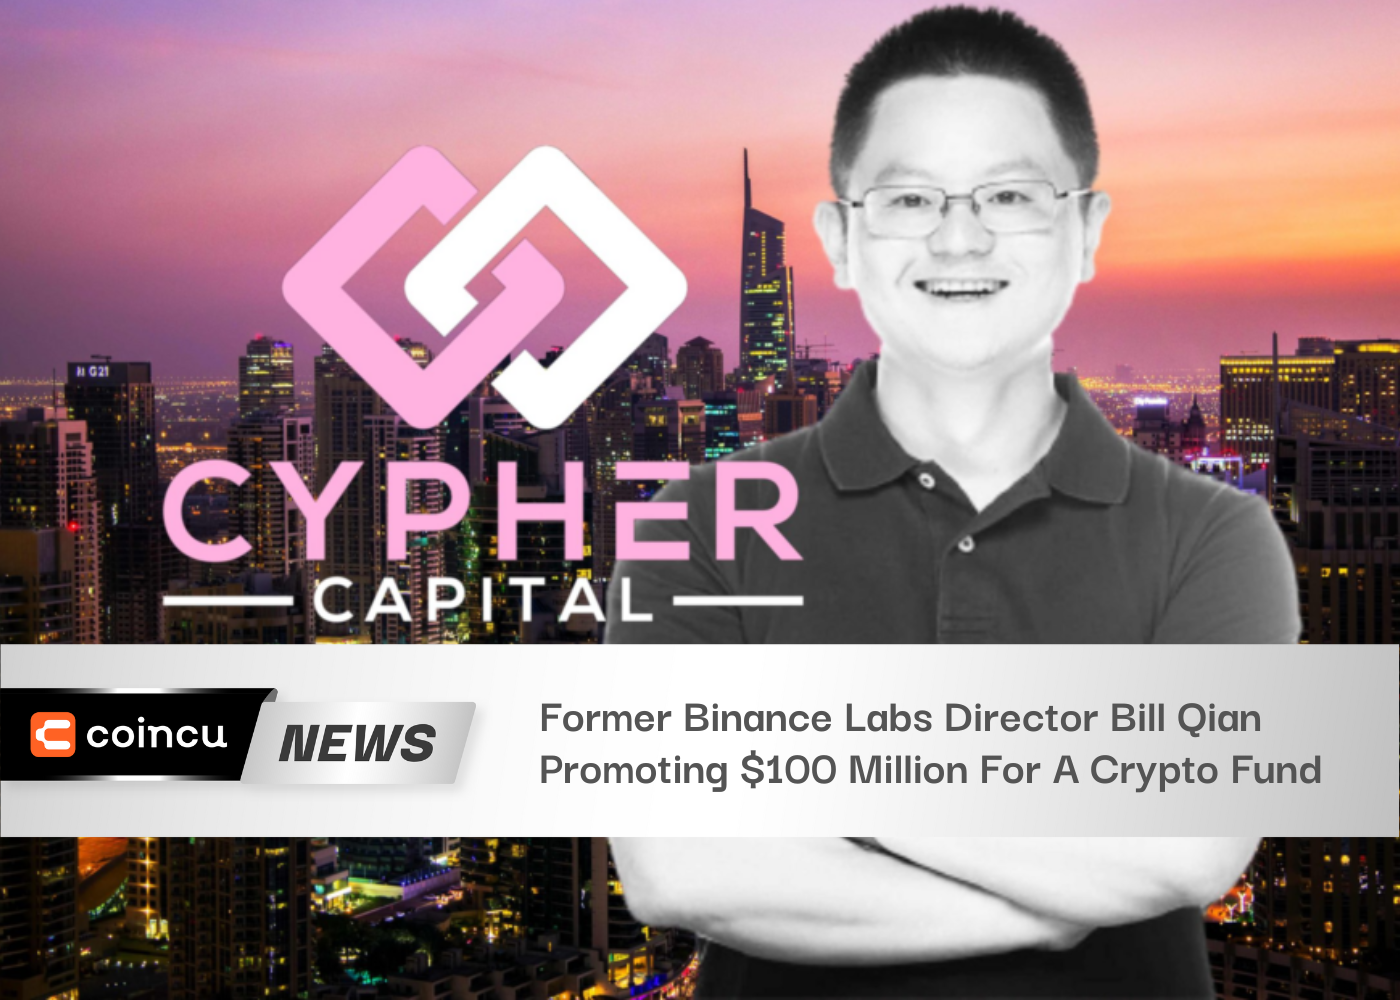 Former Binance Labs Director Bill Qian Promoting Over $100 Million For A Crypto Fund